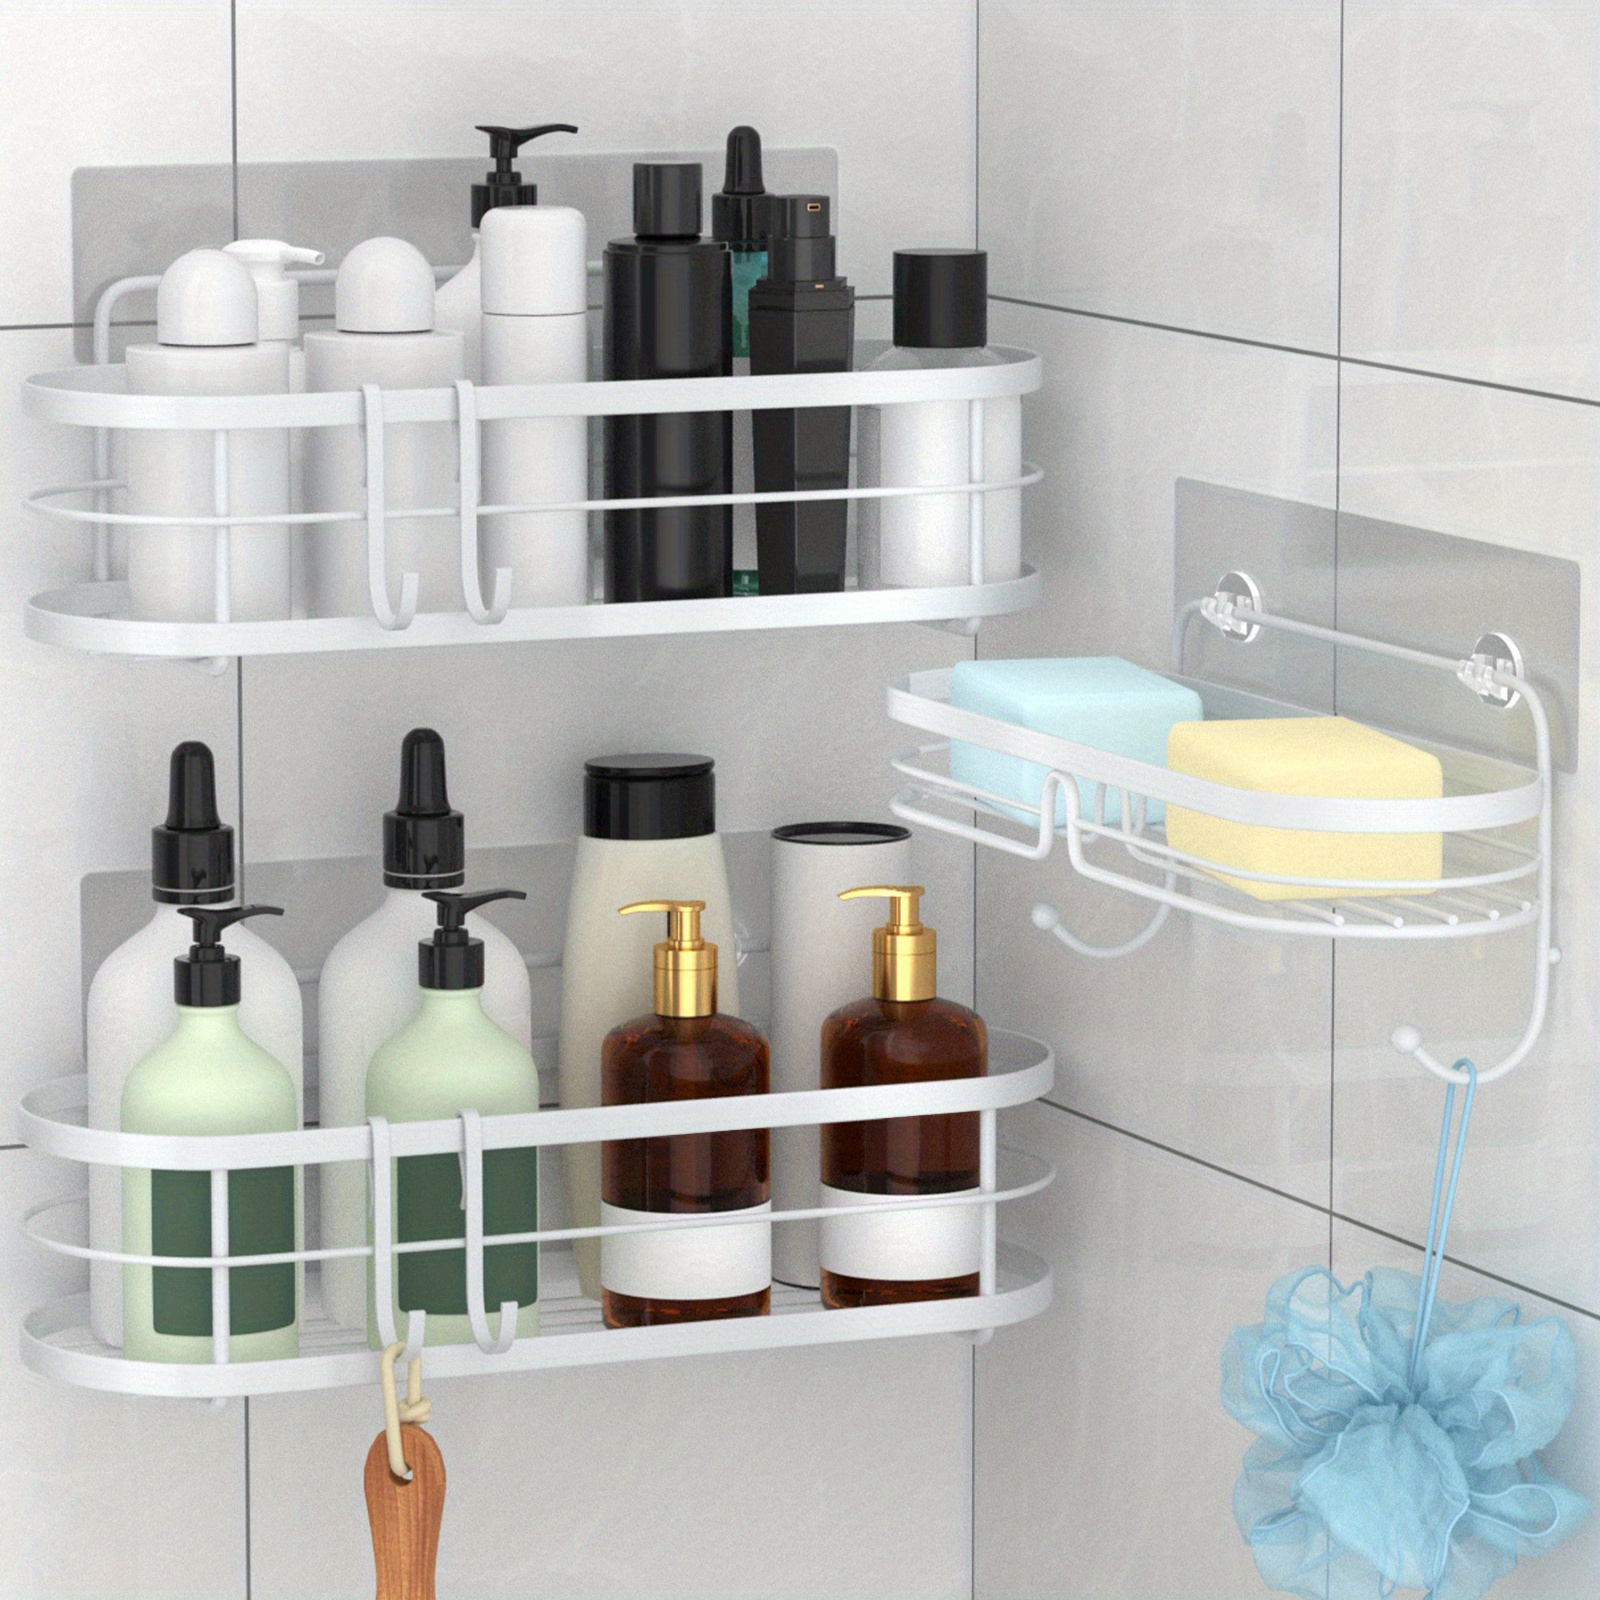 ODesign Over Door Shower Caddy Shelf with 4 Hooks Rustproof Bathroom  Kitchen Storage Basket with Suctions for Large Shampoo Conditioner - 3 Tiers